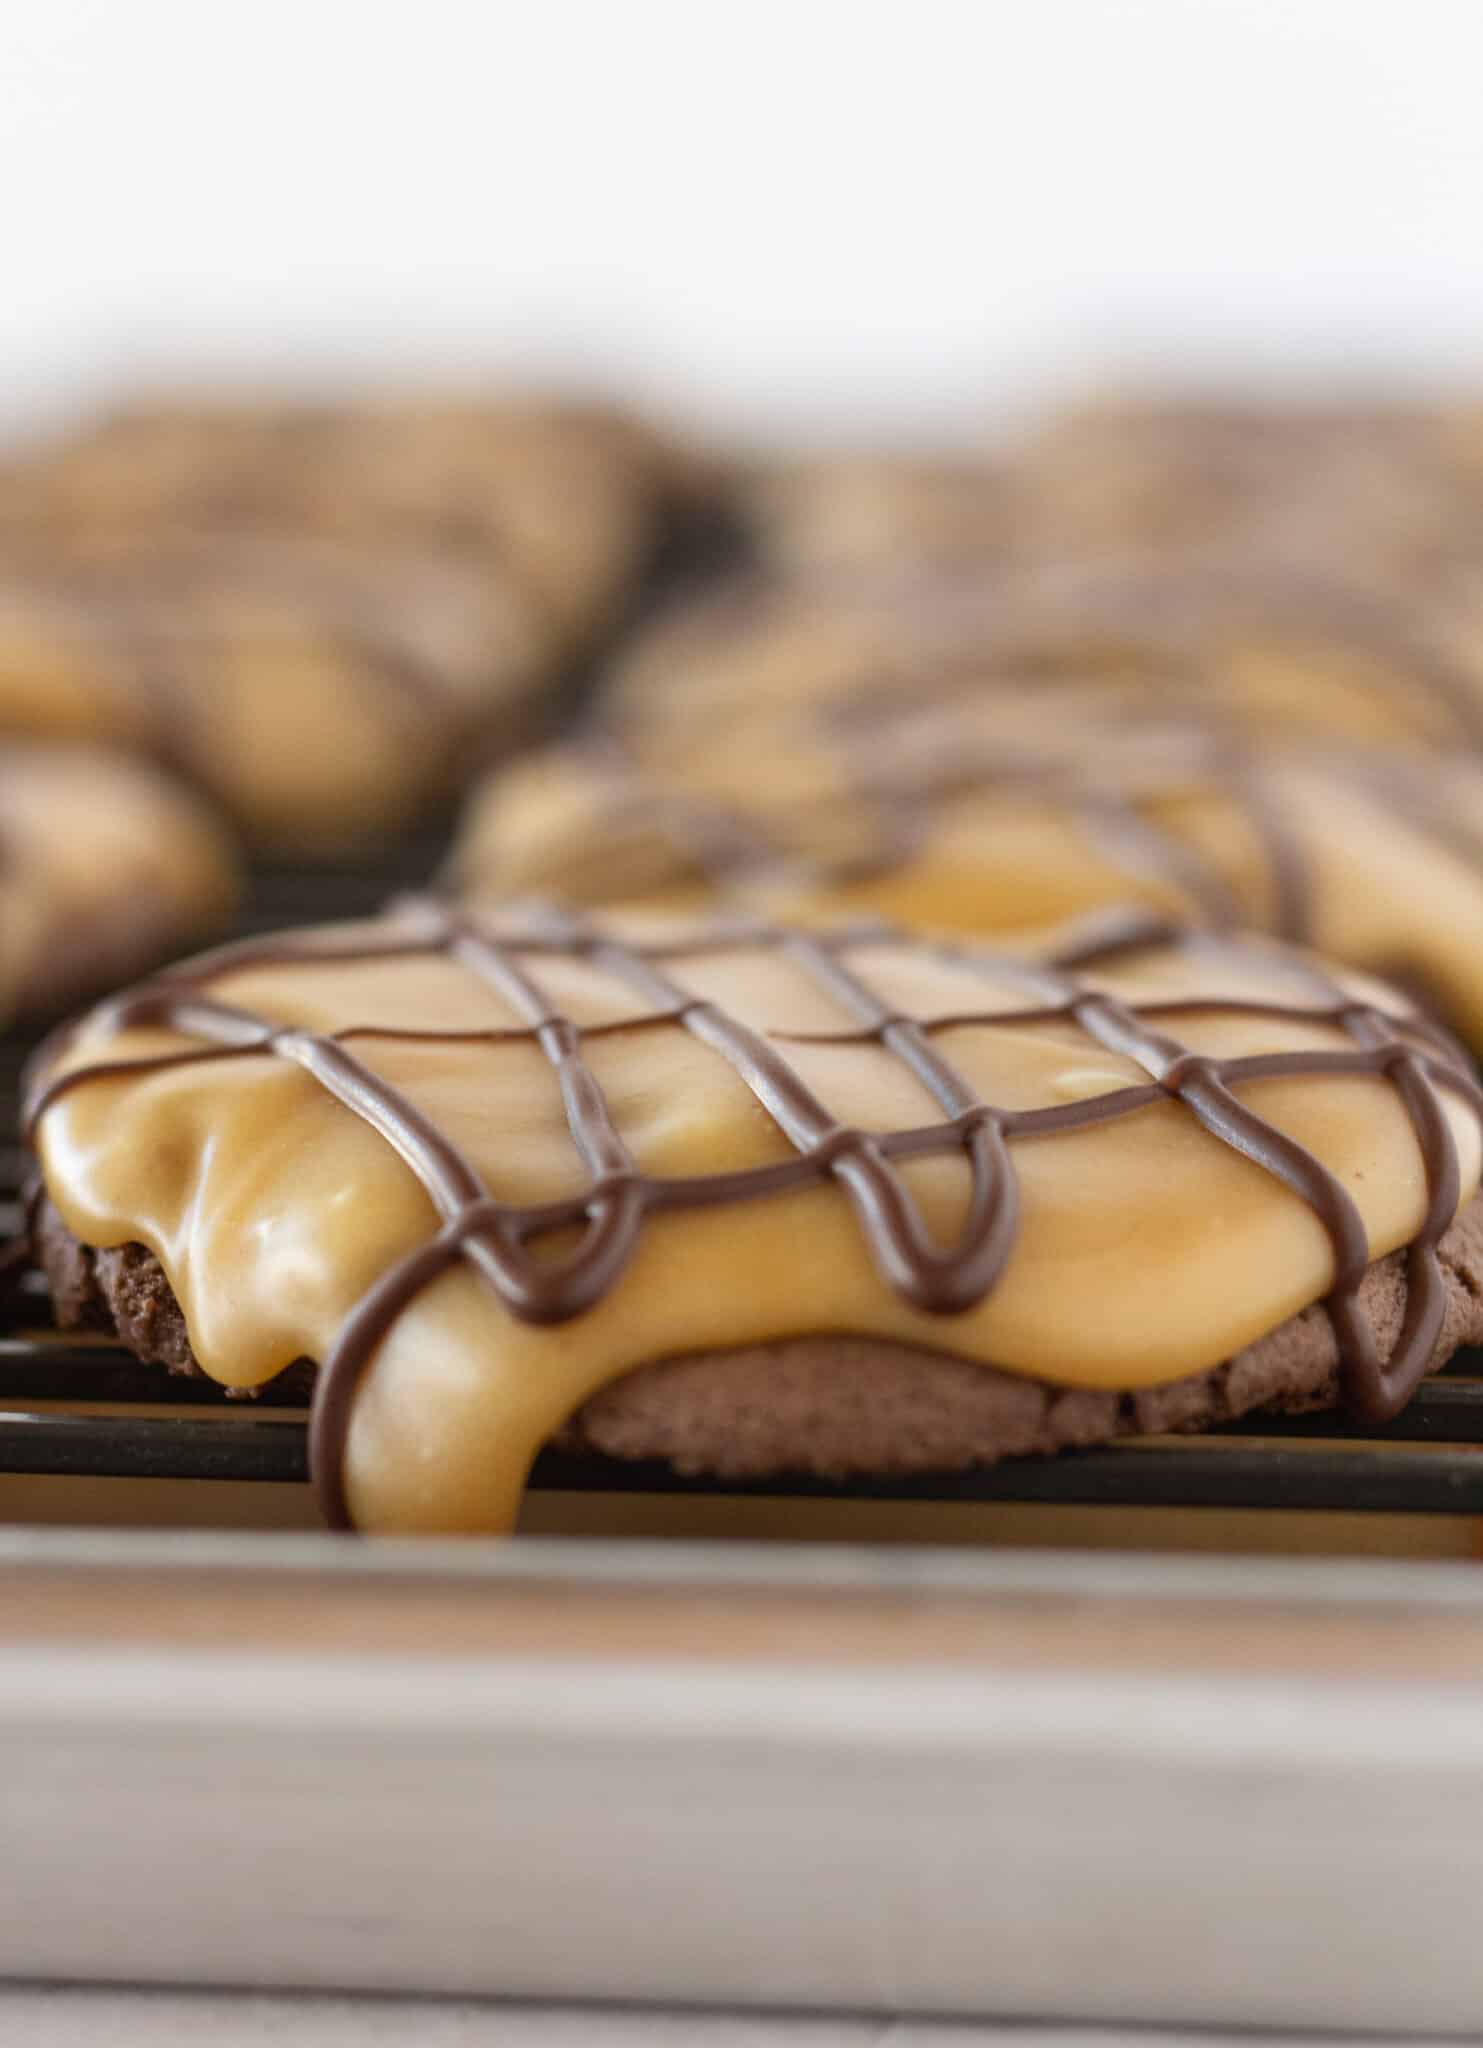 Easy Chocolate Peanut Butter Texas Sheet Cake Cookies with a cake mix, a recipe featured by top US cookies blogger, Practically Homemade